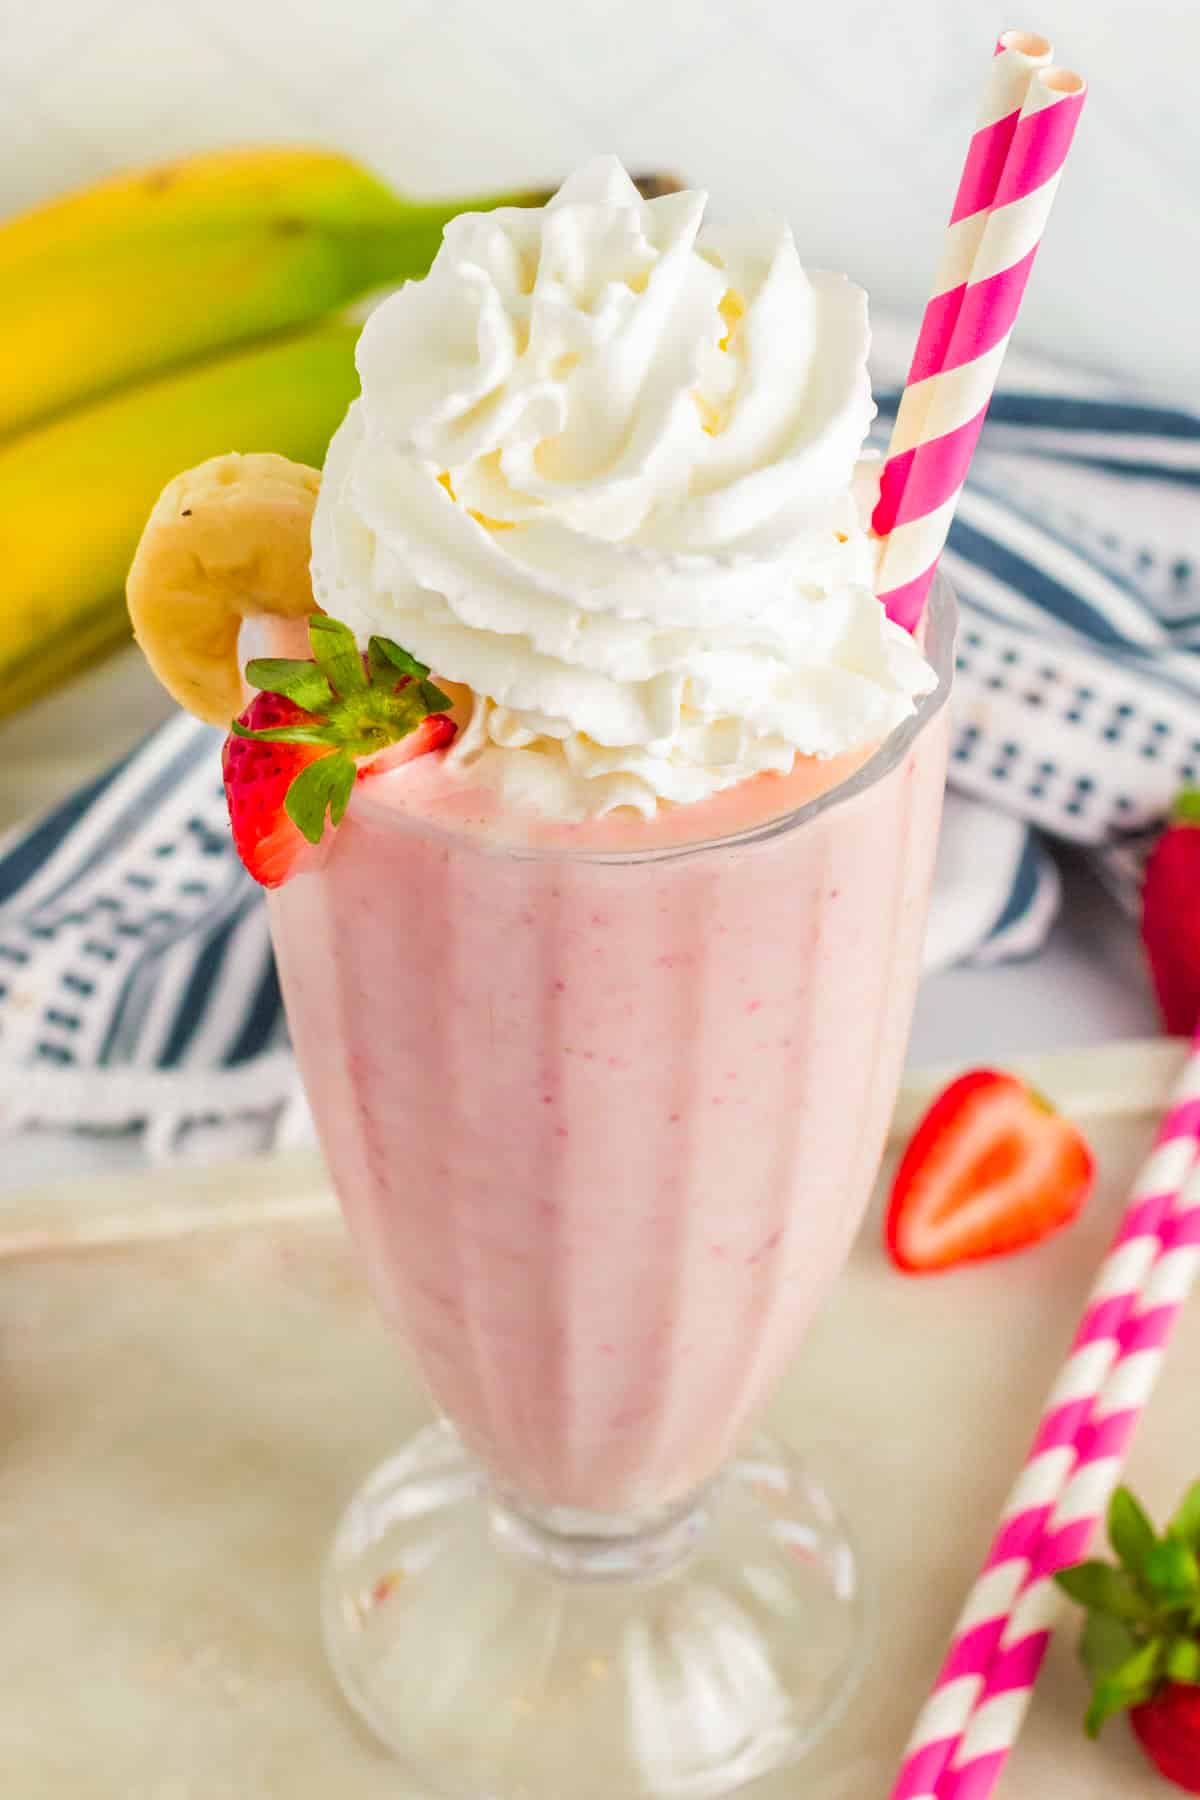 Strawberry Banana Milkshake topped with whipped cream and garnished with a slice of strawberry and a slice of banana. 